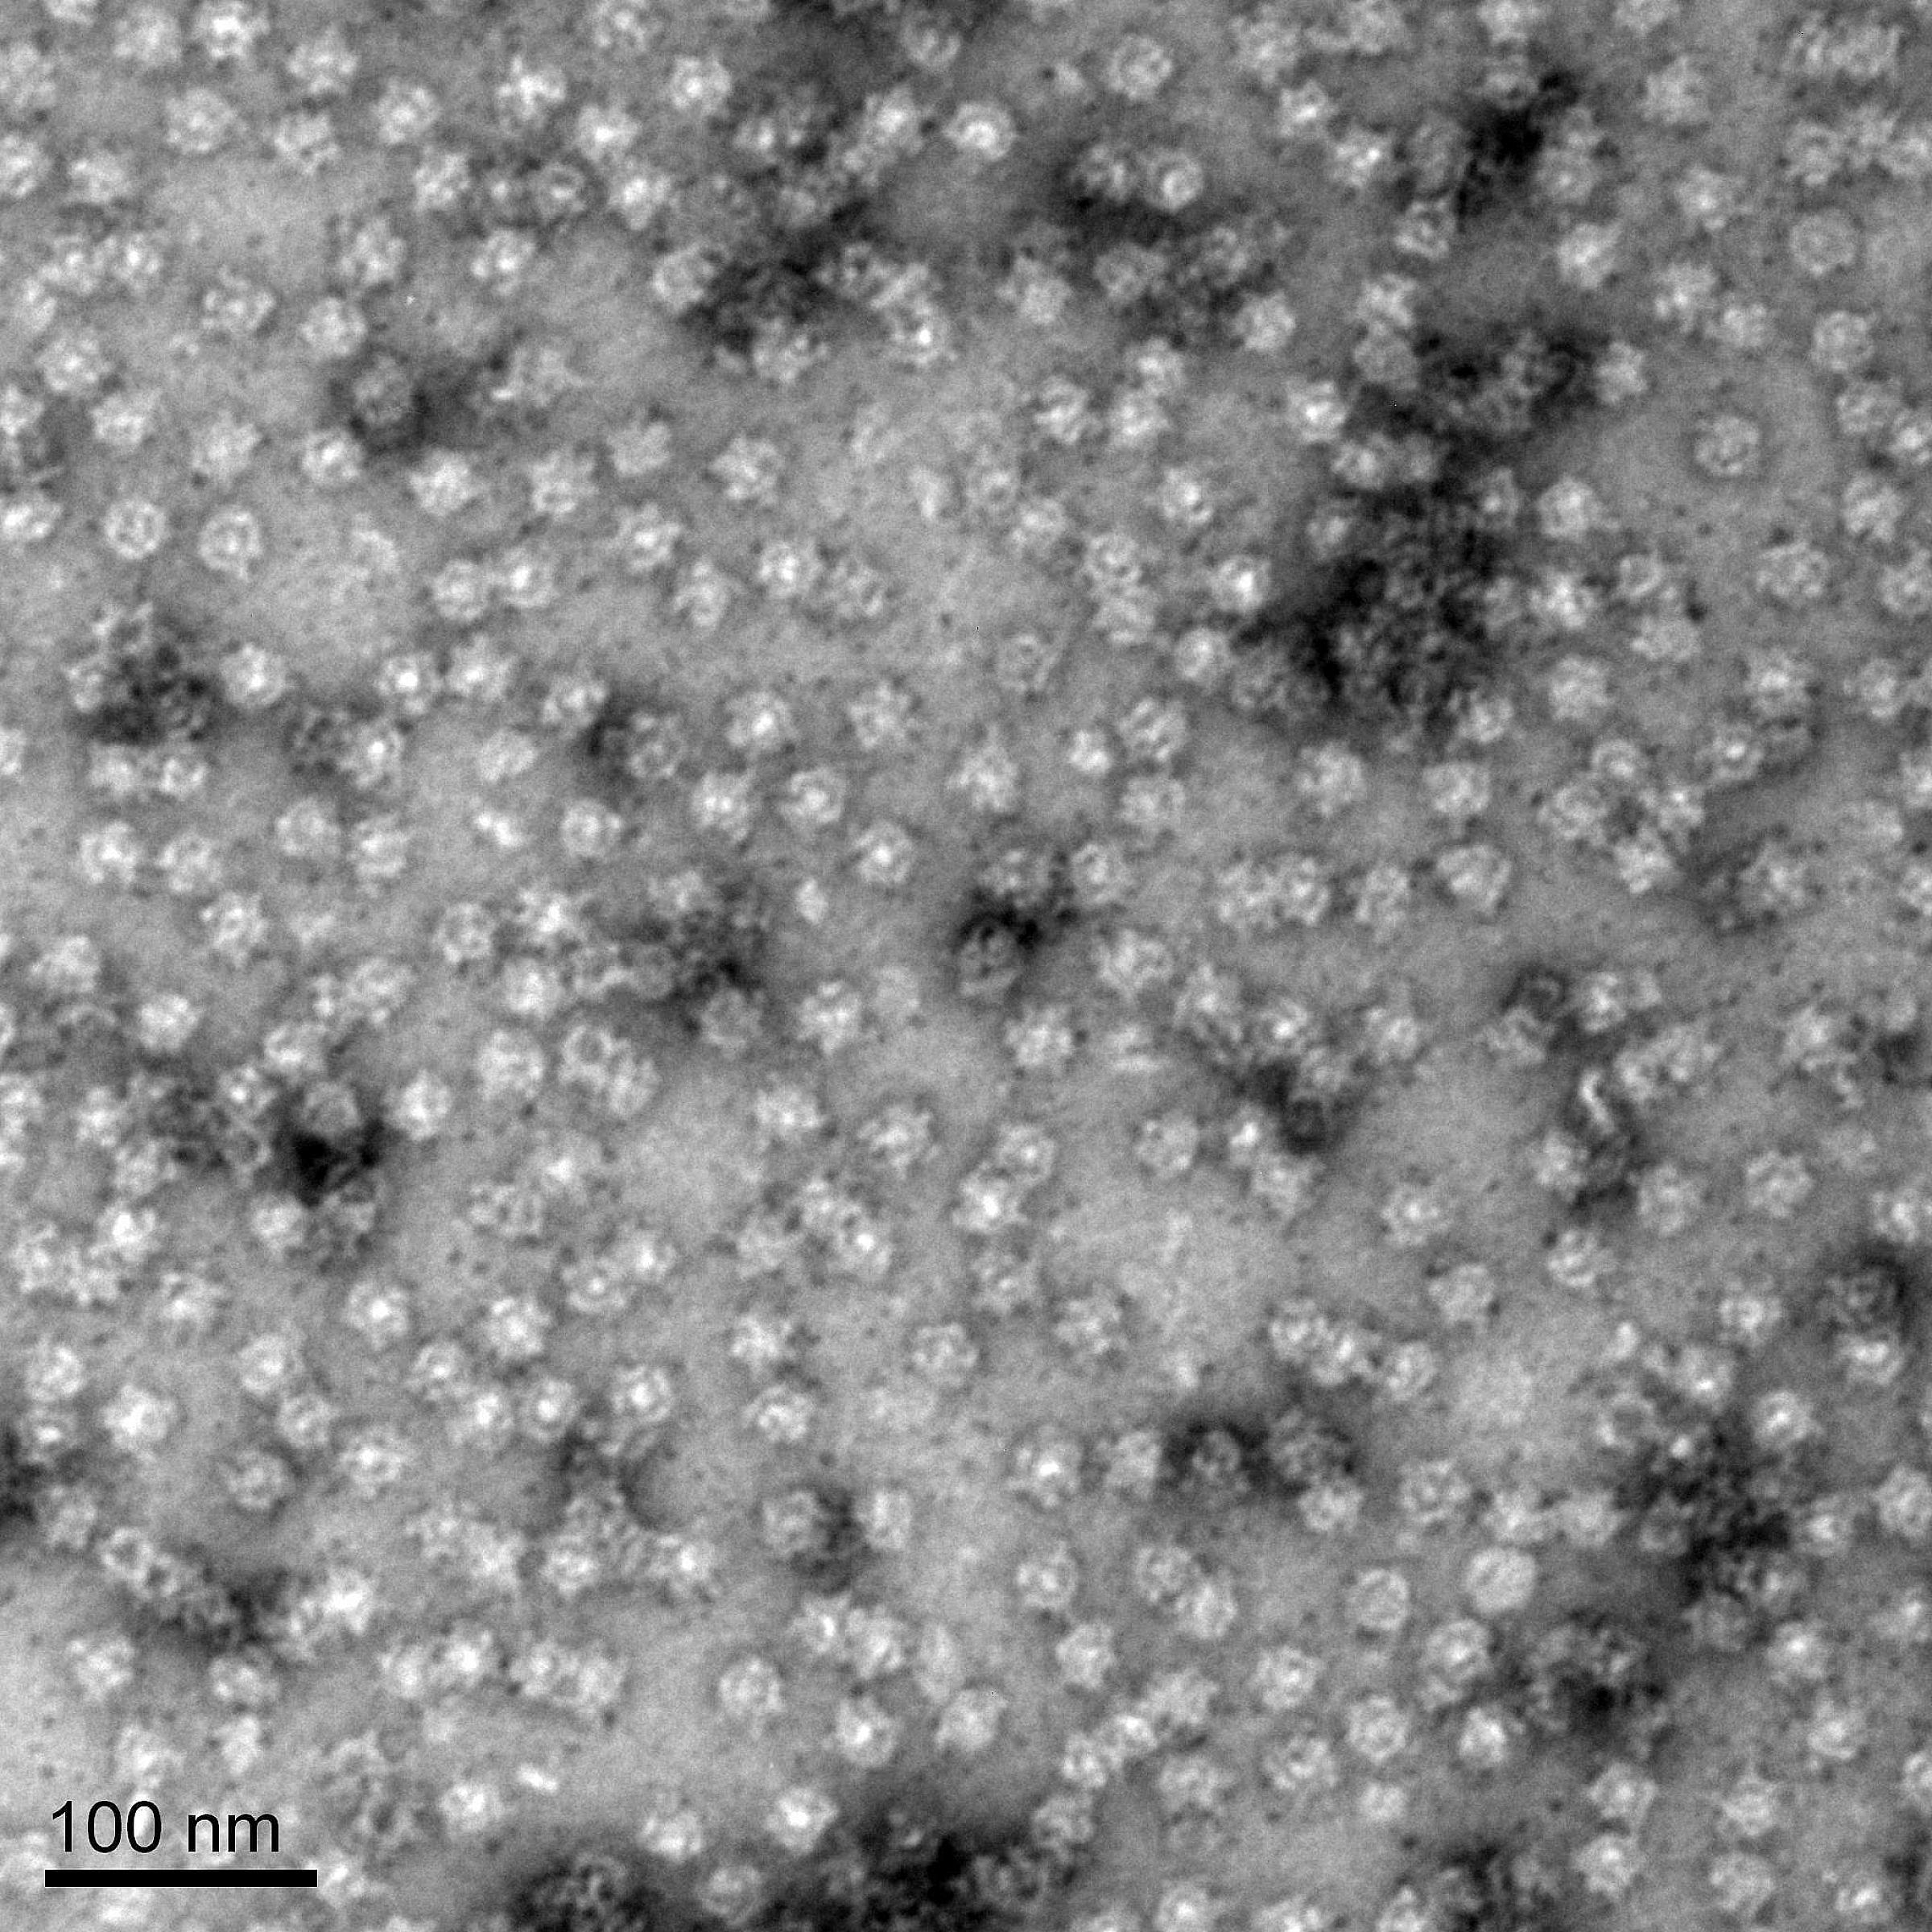 Microscope image of PNMA2 proteins. Each starlike particle is a separate 12-sided complex.